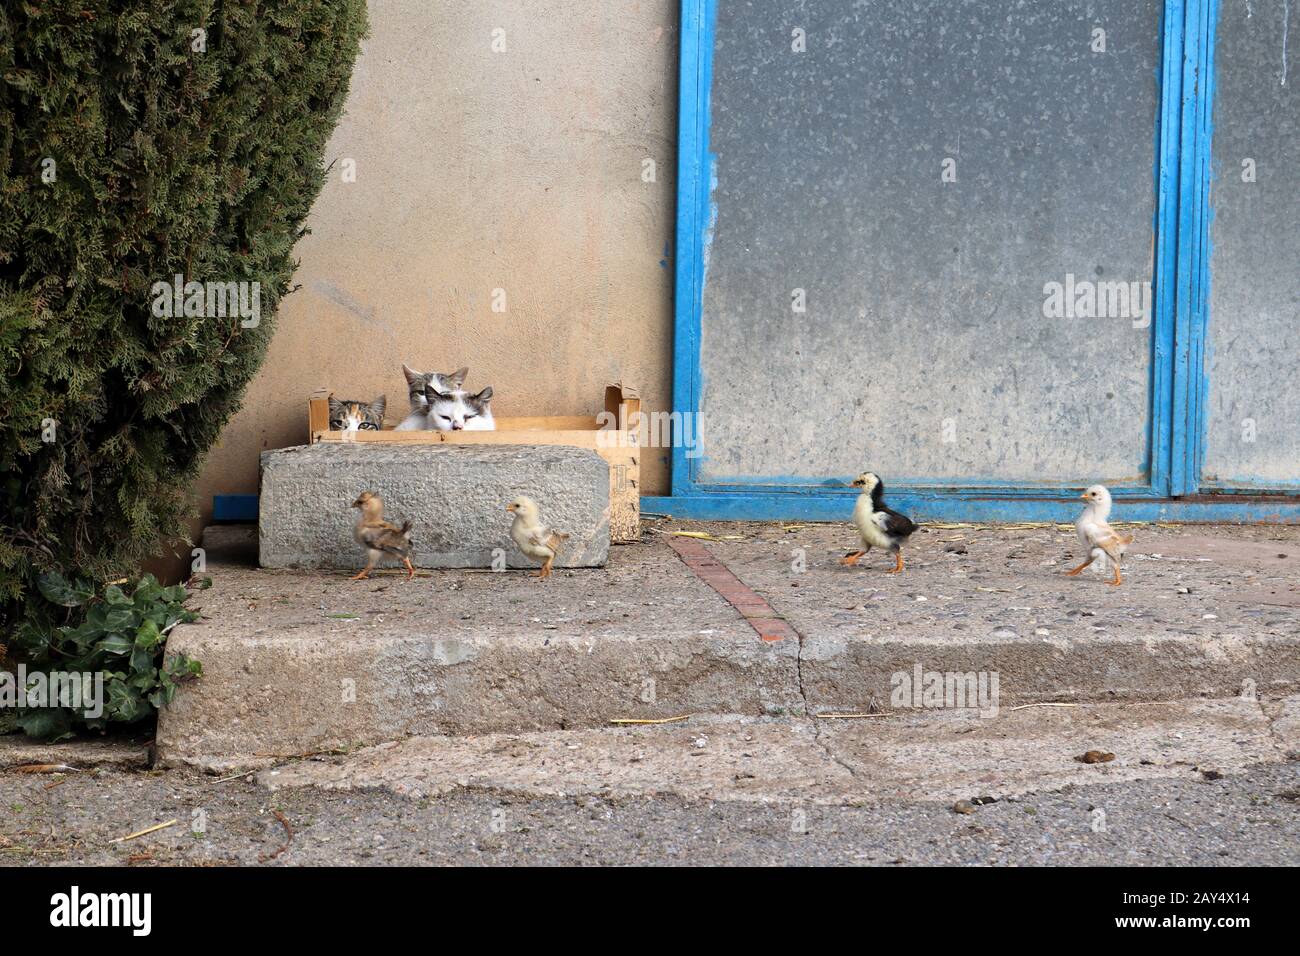 Catwalk - chicks run in front of cats Stock Photo